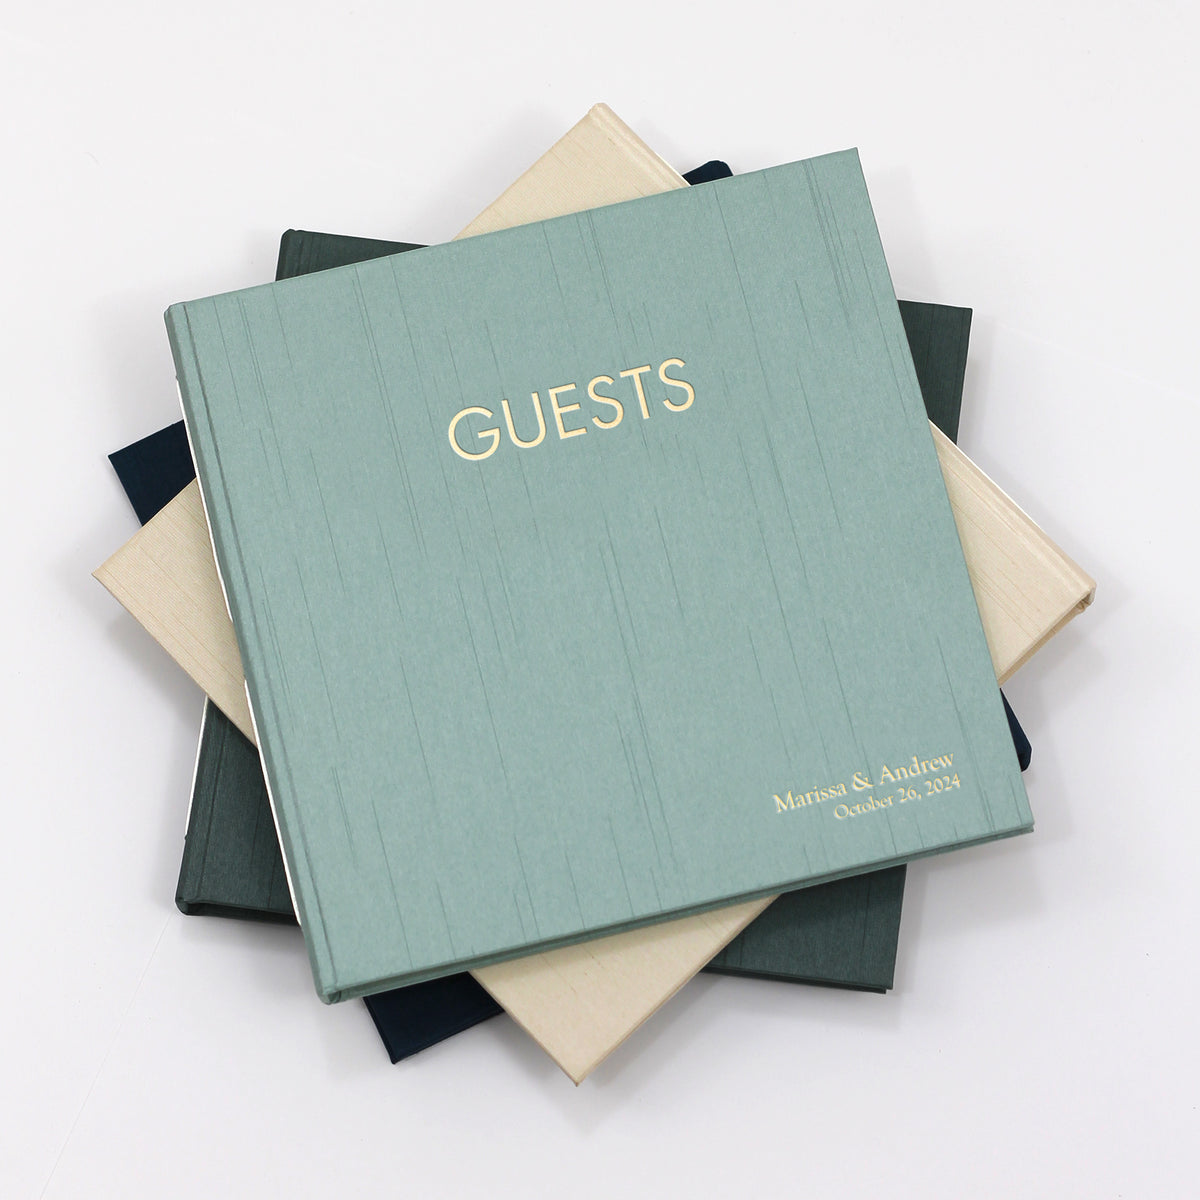 Event Guestbook Embossed with “Guests” | Cover: Celery Cotton | Available Personalized